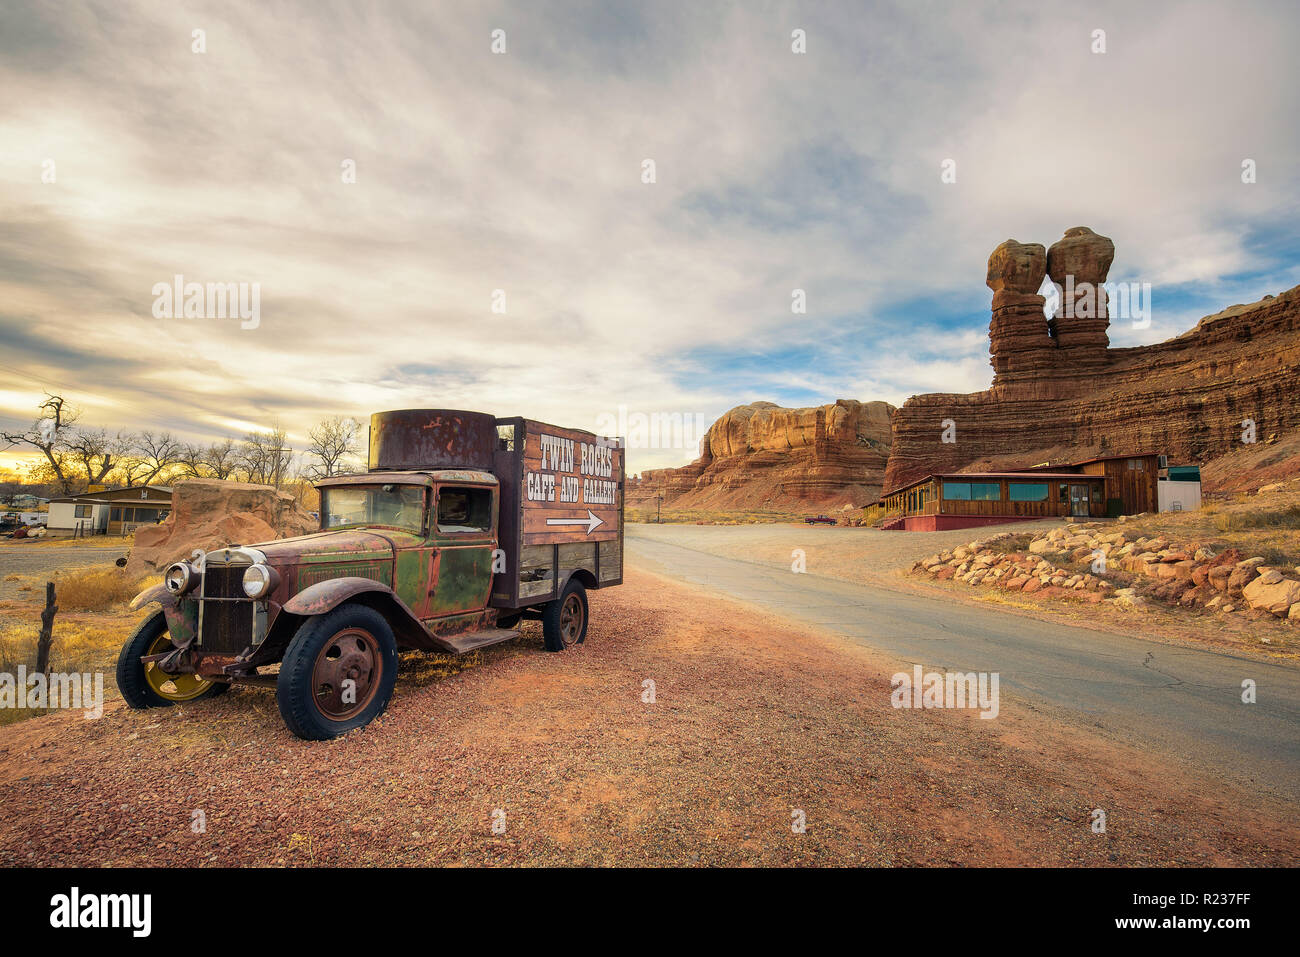 Old truck with advertising for the Twin Rocks Cafe and Gallery in Utah Stock Photo